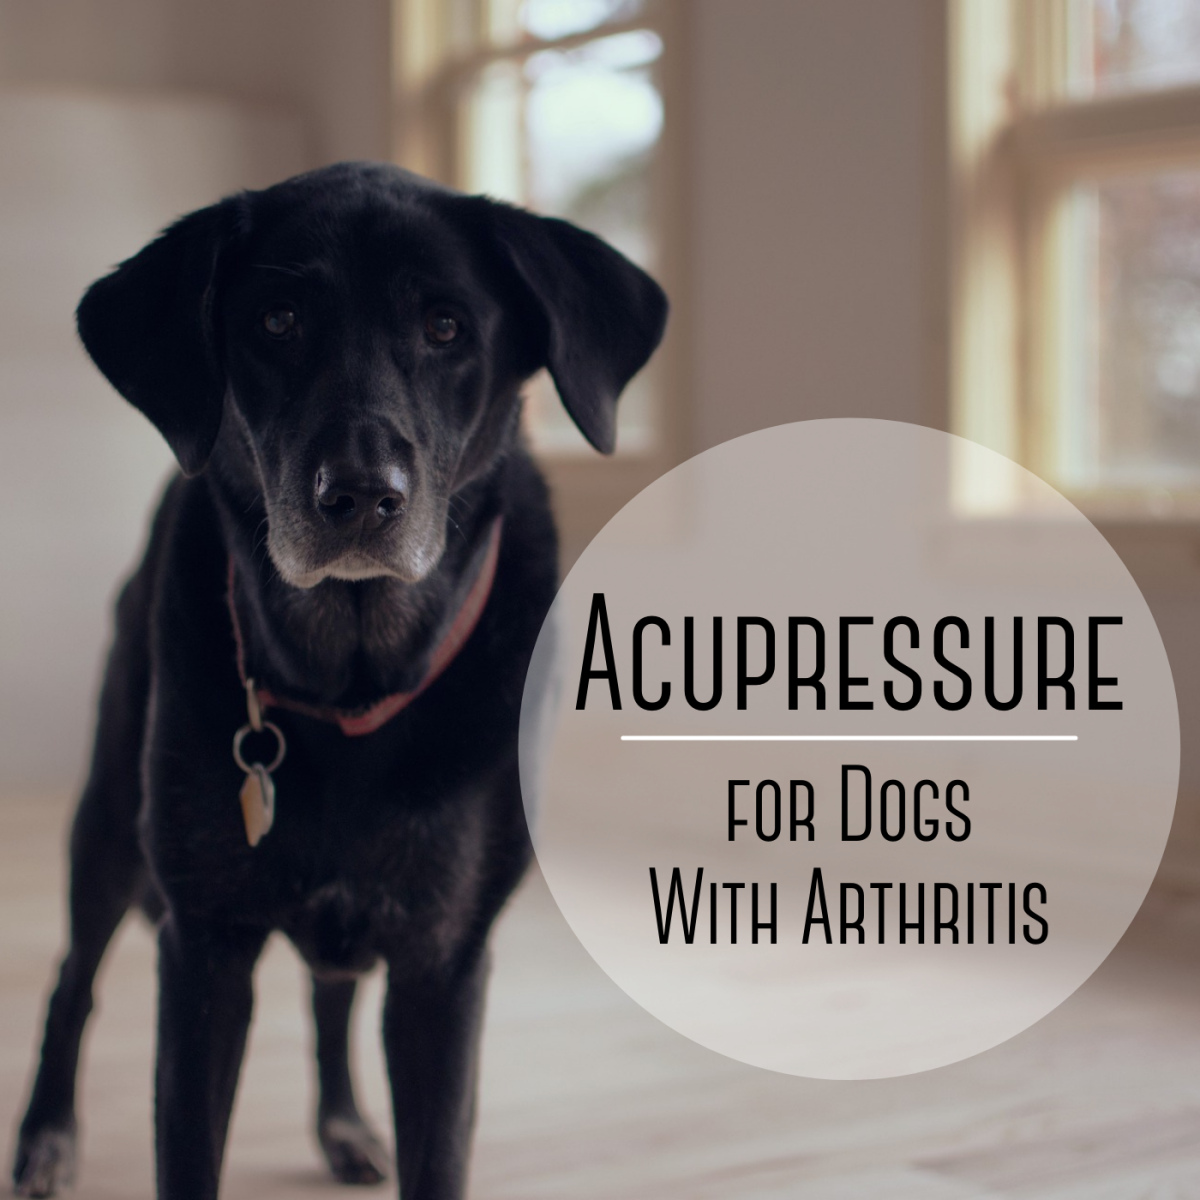 Acupressure Techniques for Dogs With Arthritis